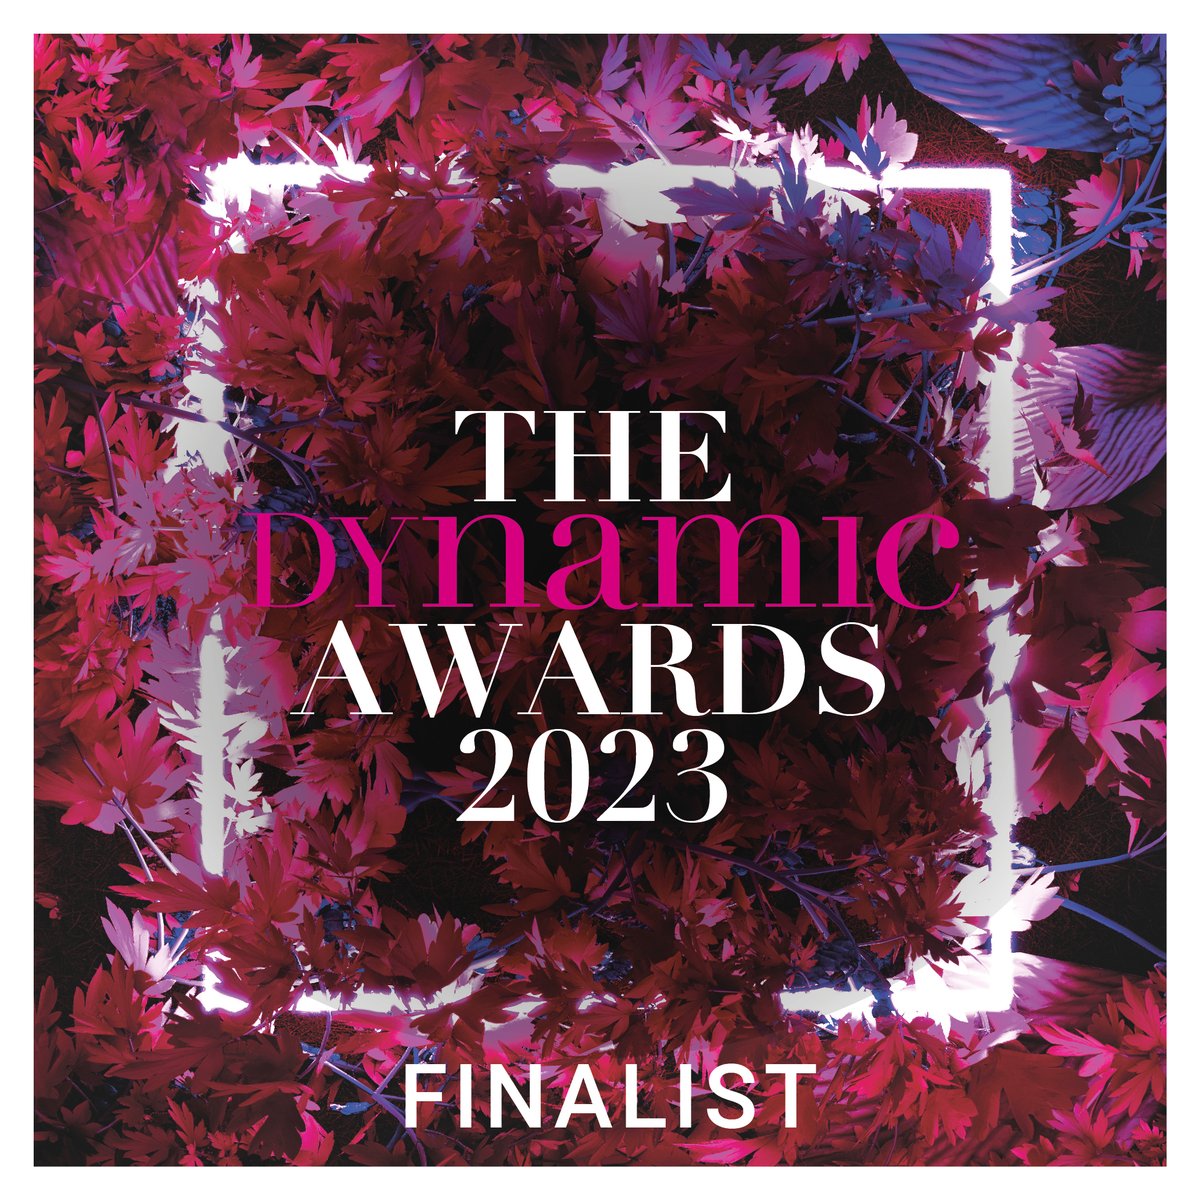 Tonight is The Dynamic Awards! Our Chief Executive, Sally Chalk, is nominated for Innovator of the Year 2023.

Congratulations to all the other nominees, we are looking forward to a great event. 

#WomenInBusiness #DynamicAwards @DynamicWomenUK @PlatBusMag